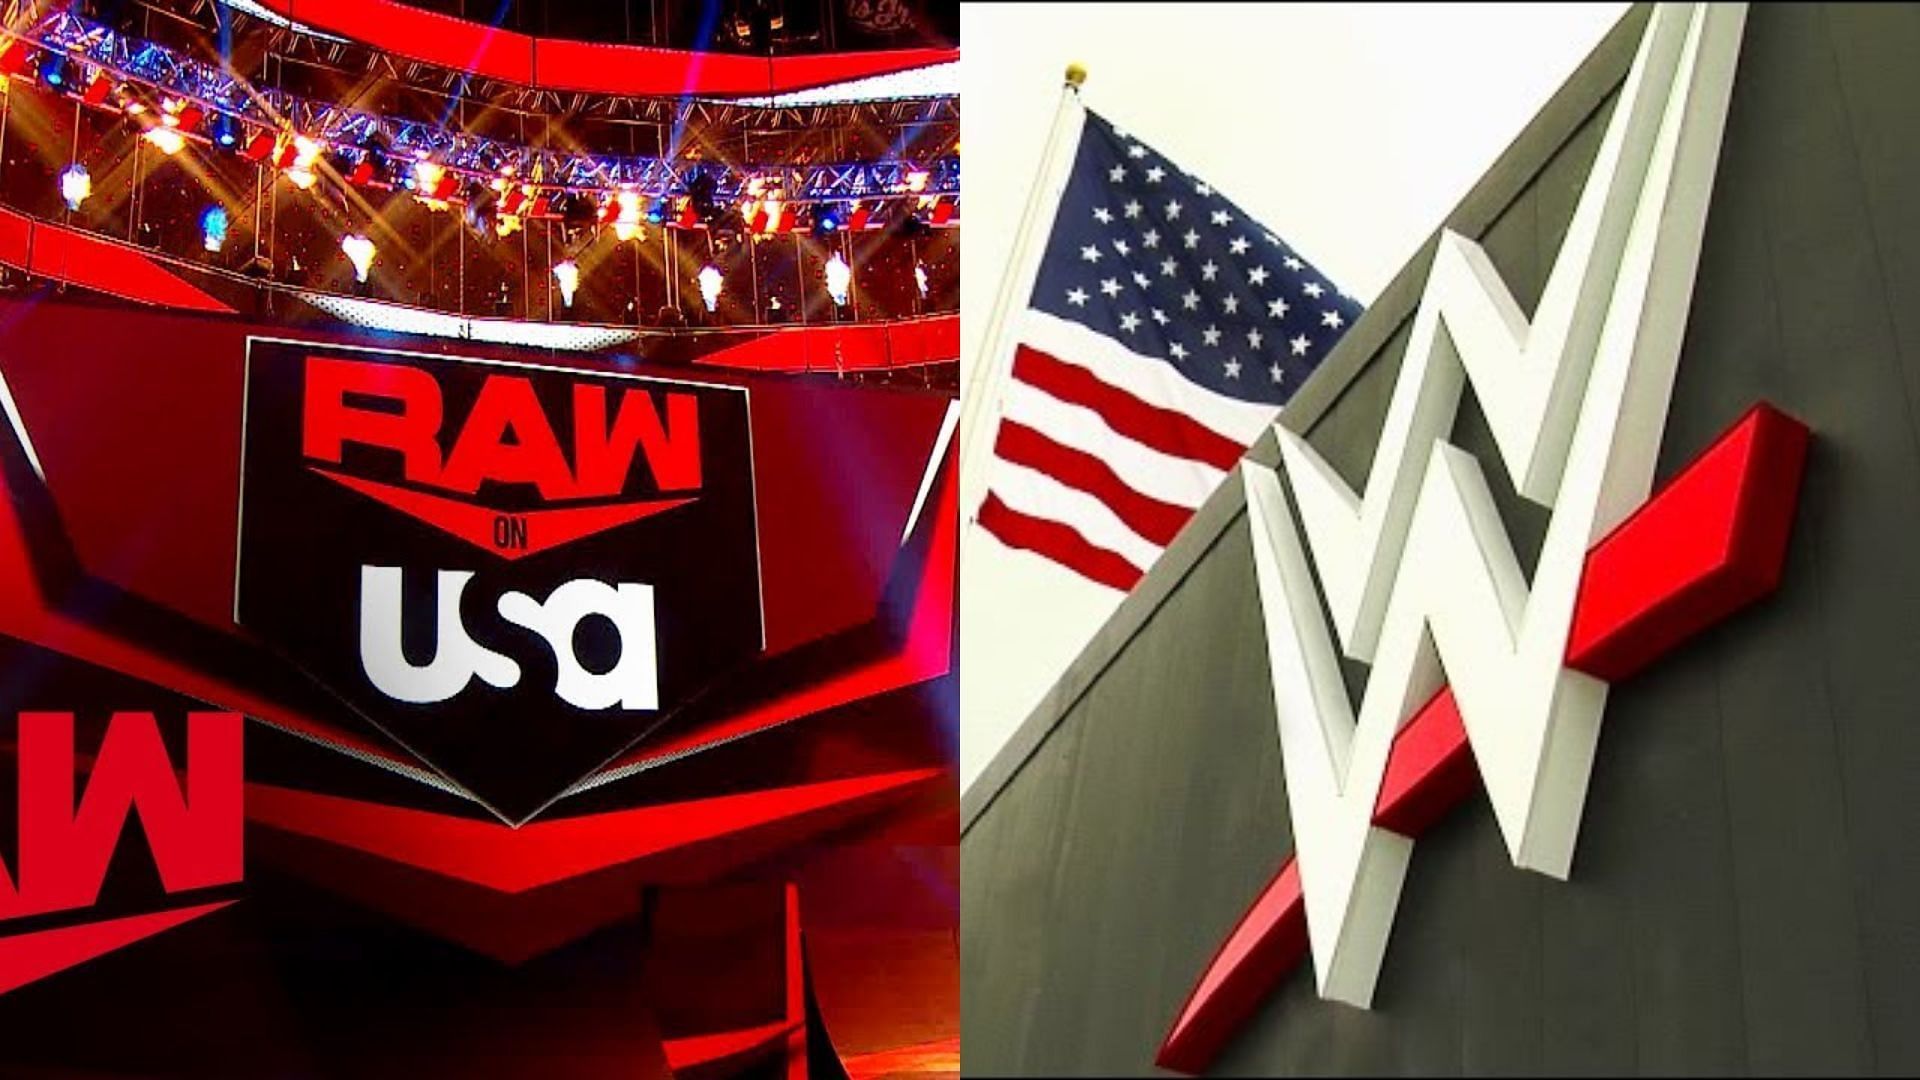 WWE held the first RAW after WrestleMania 40 this week